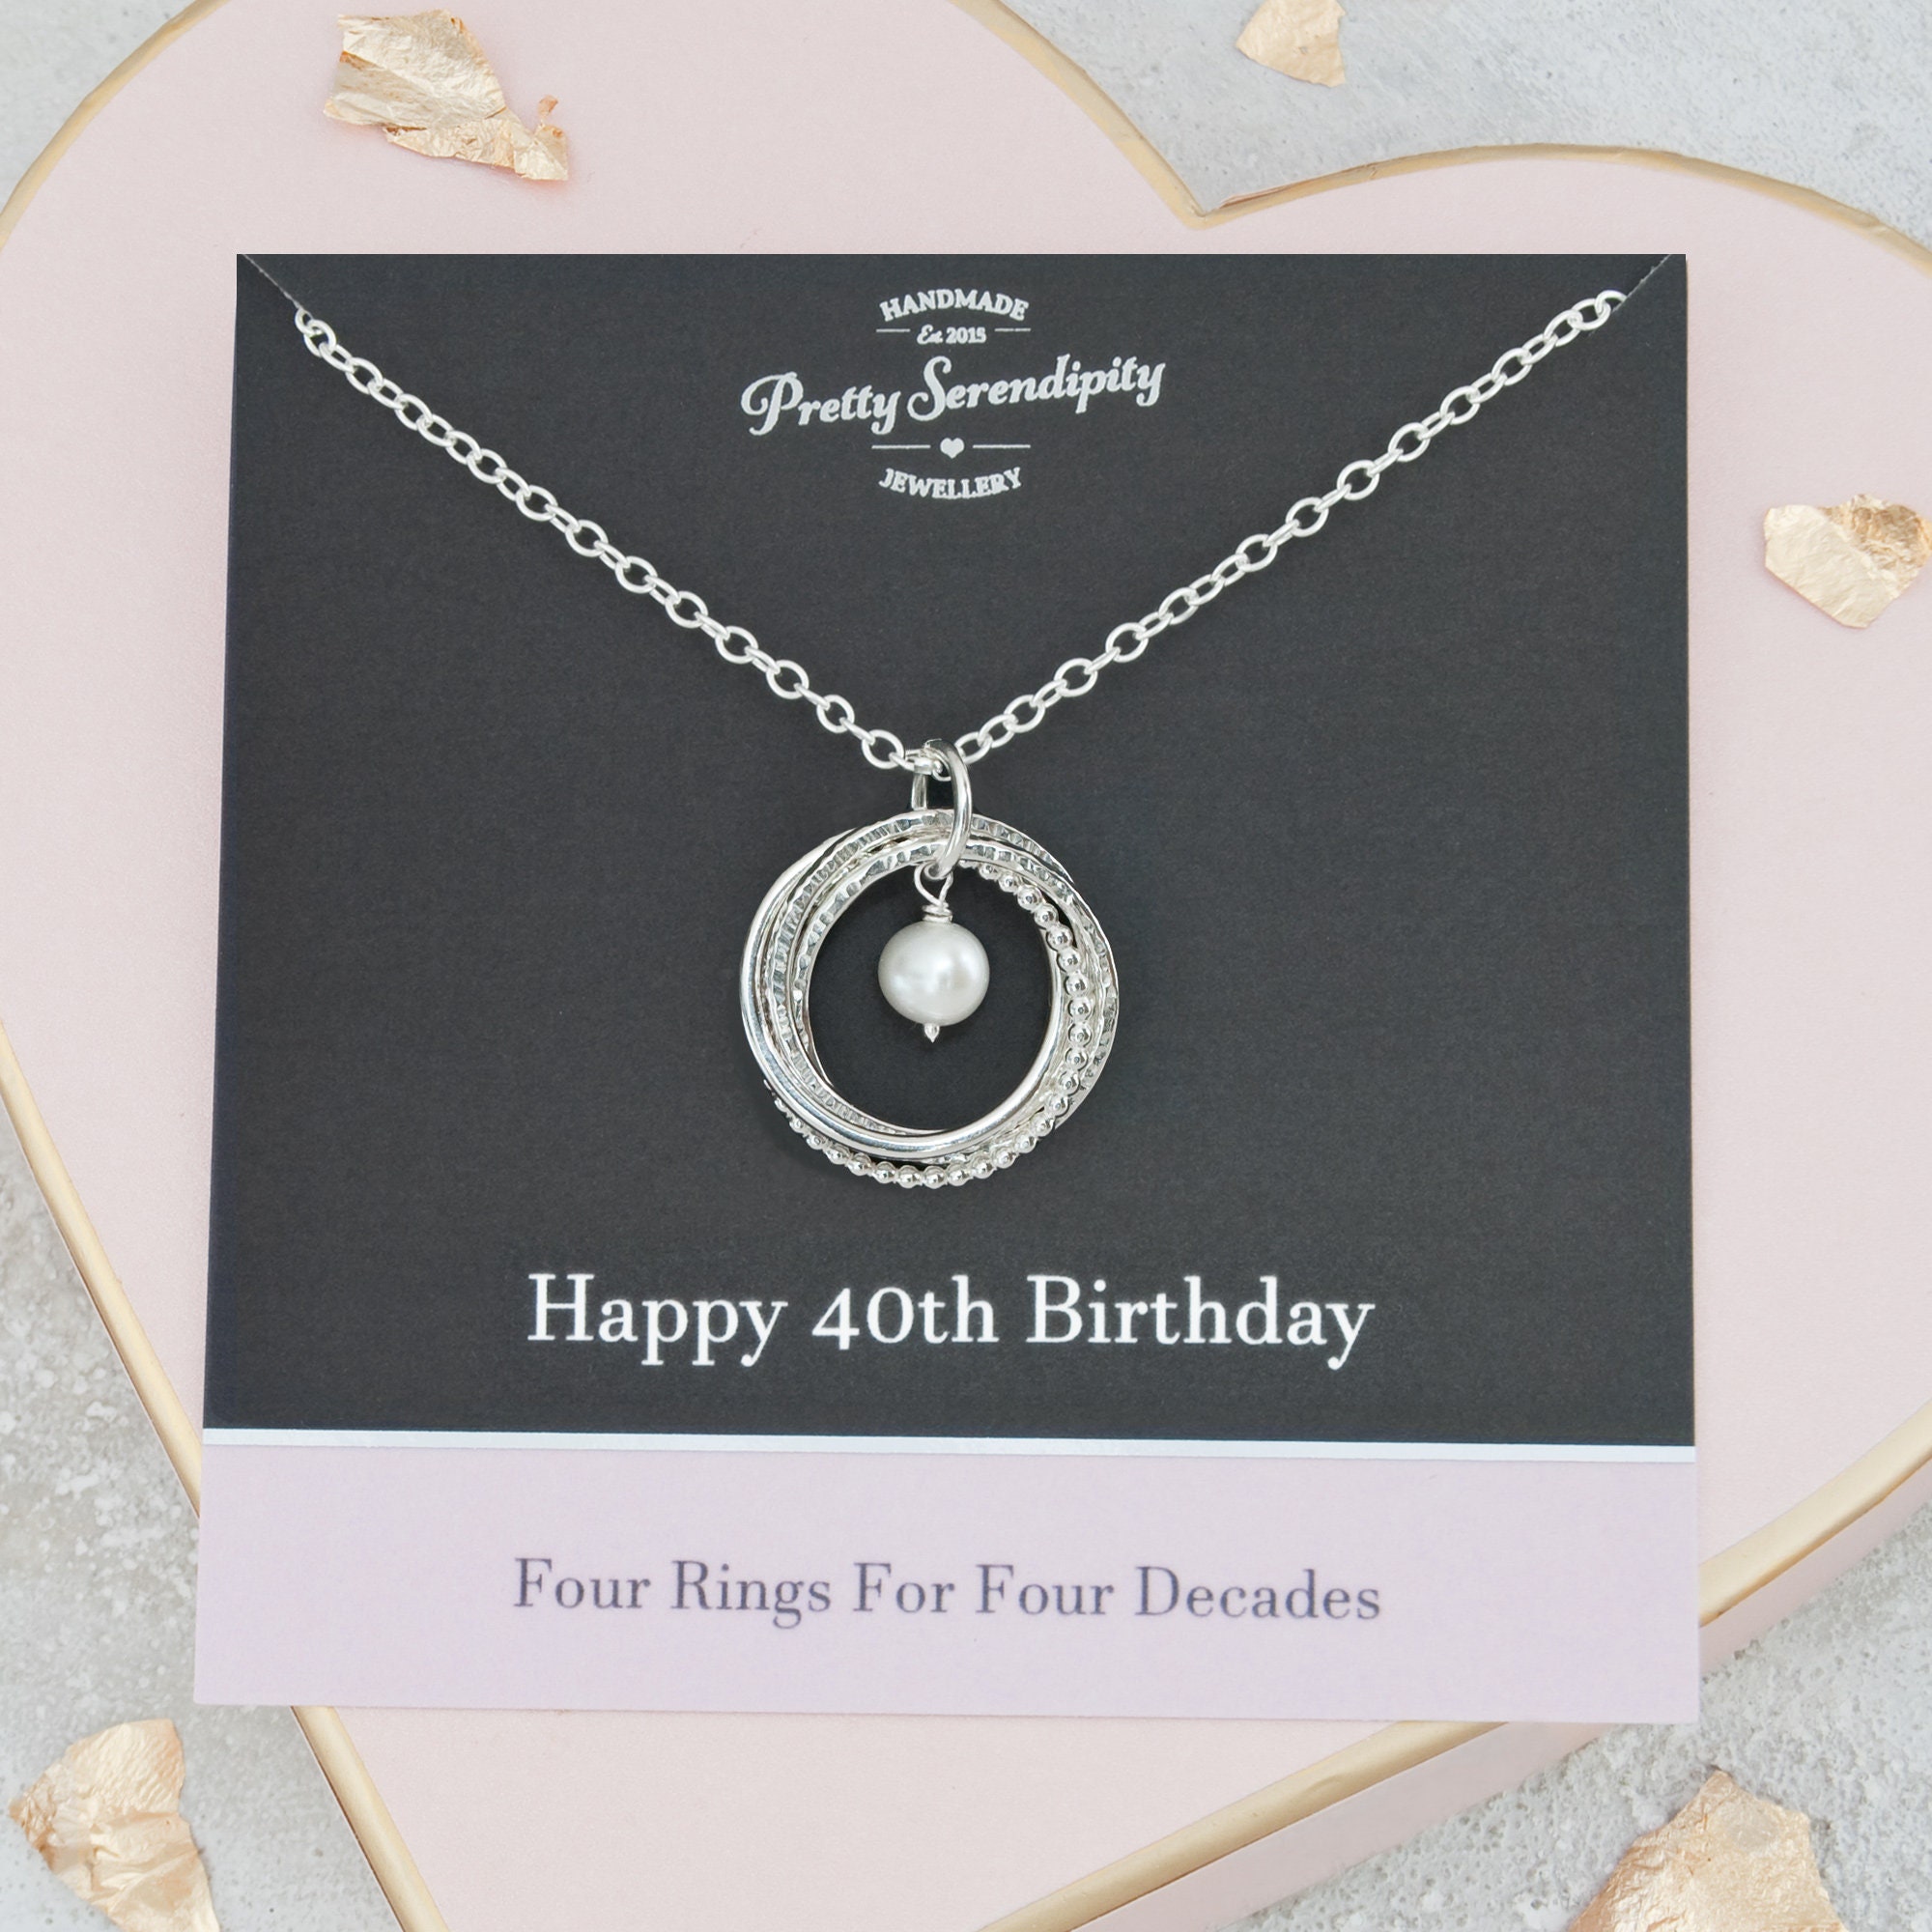 40Th Birthday Birthstone Necklace - Textured Sterling Silver, 4 Rings For Decades, Gift Her